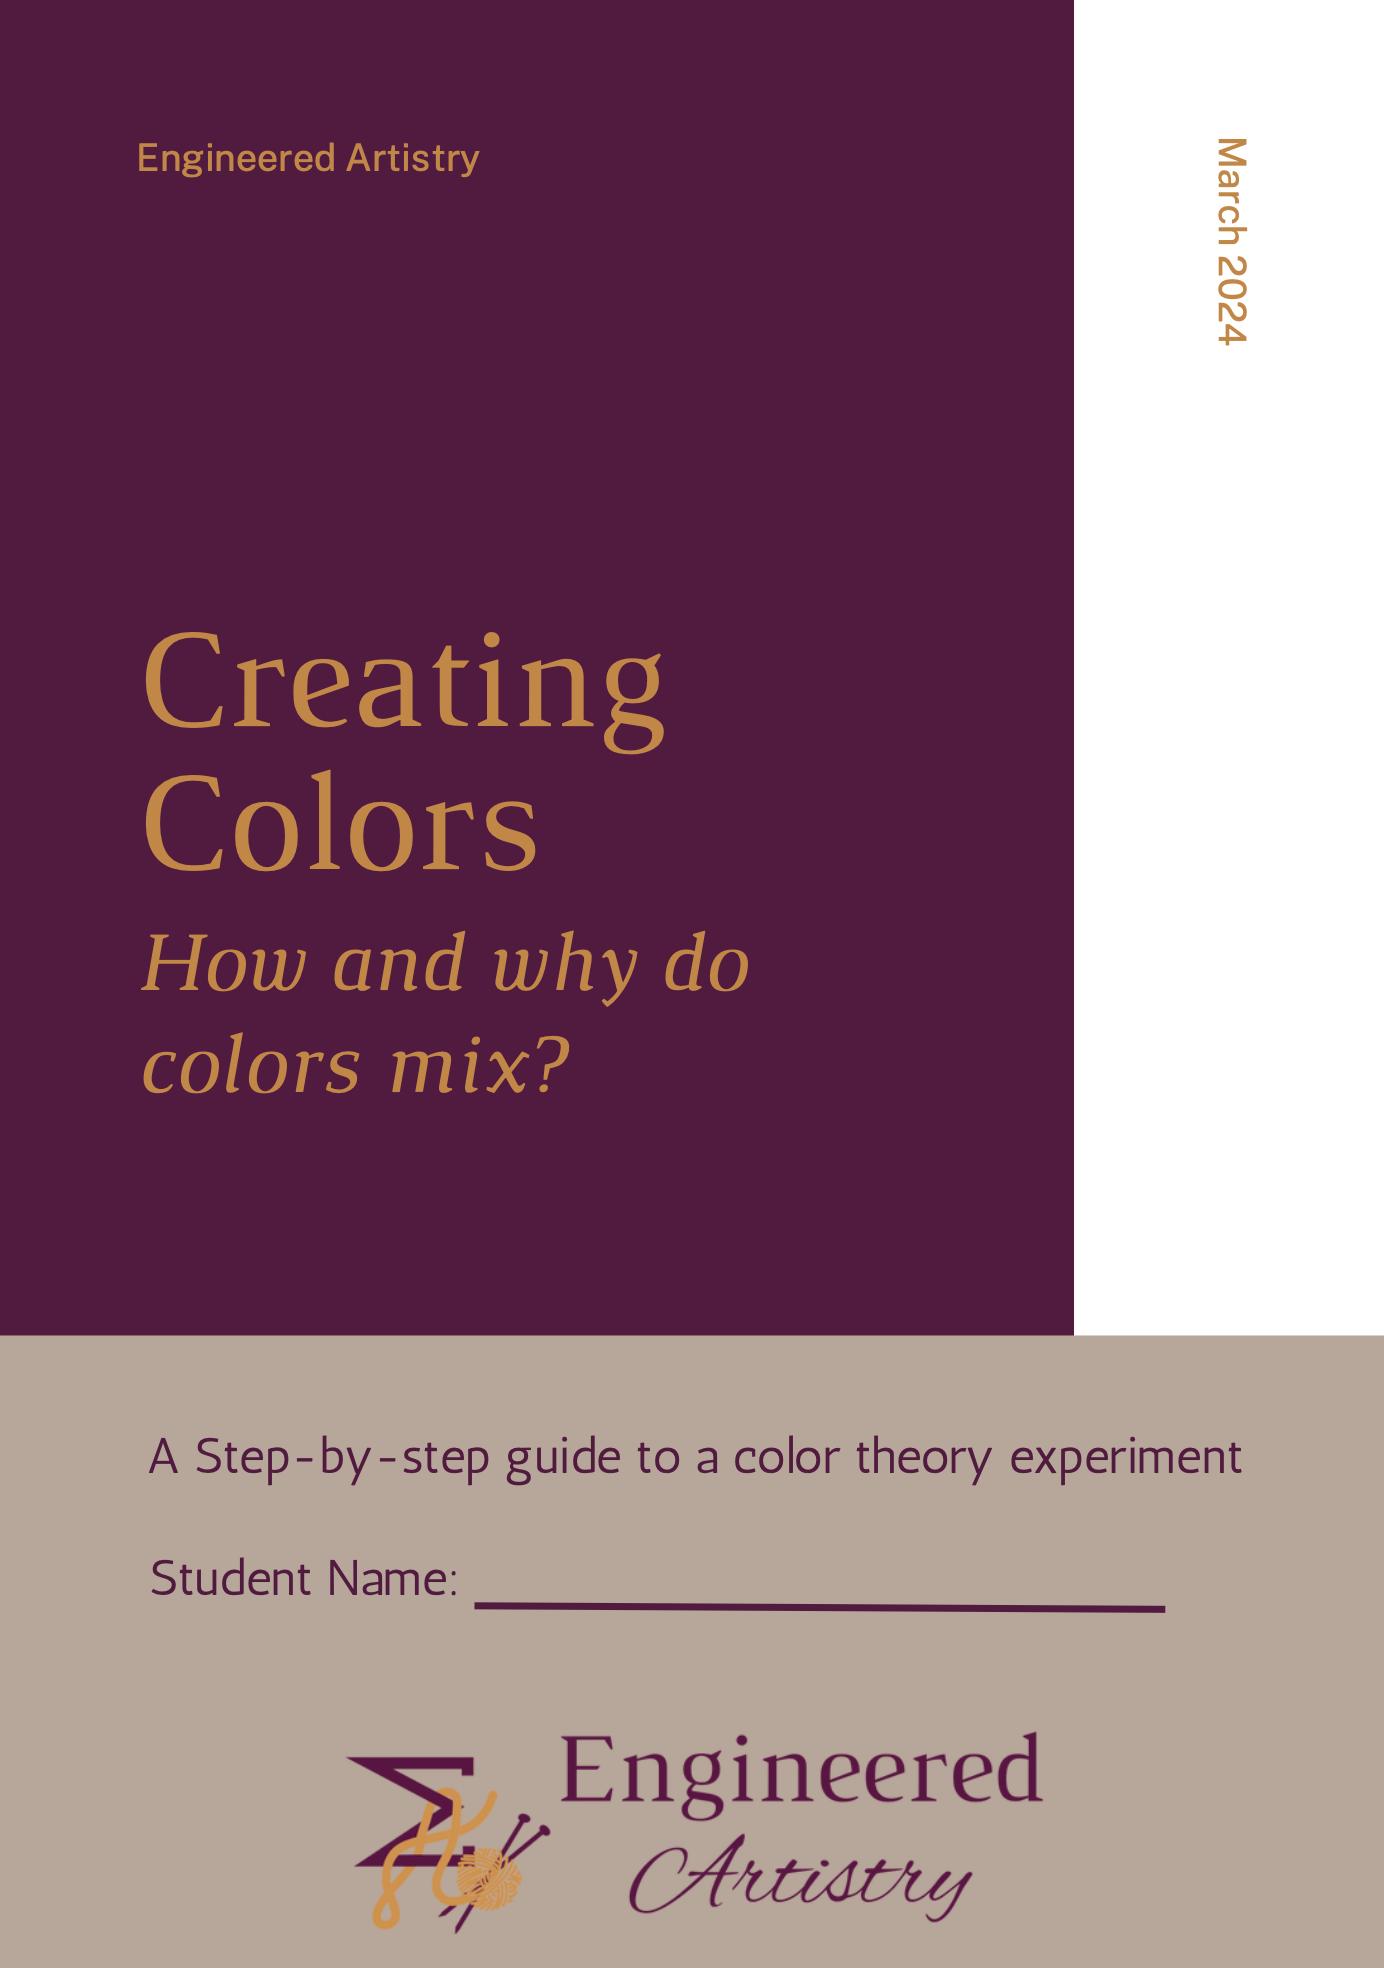 Experiment with Color: A Guided Science Experiment for Kids